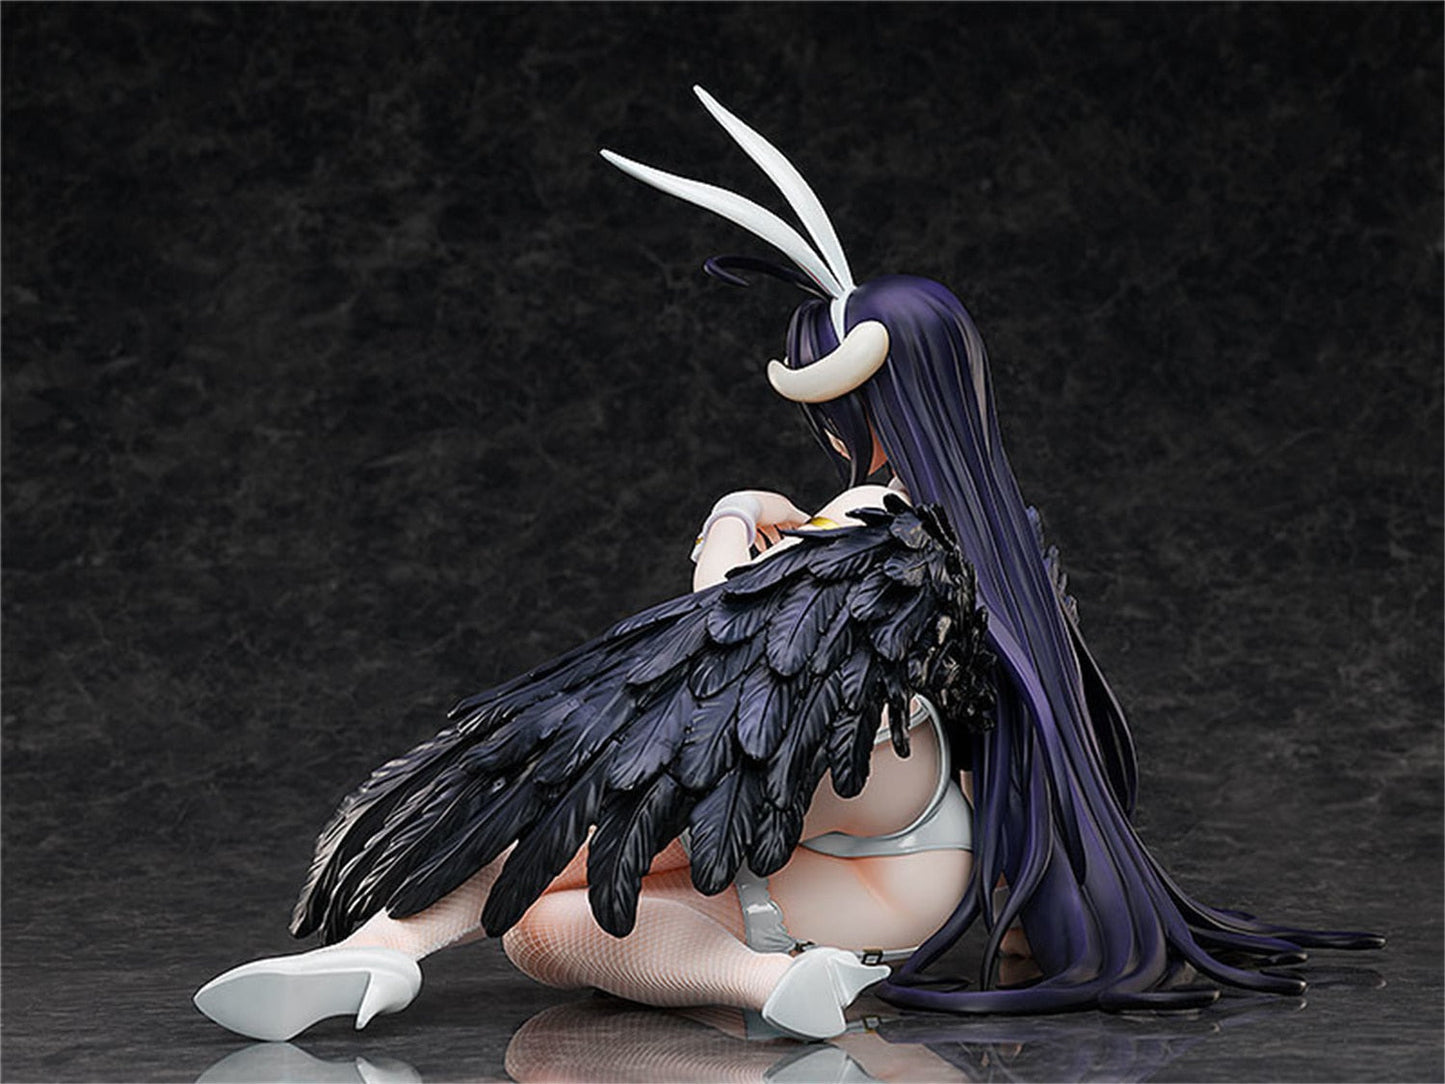 30cm Overlord IV Albedo B-style Bunny Ver Sexy Nude Girl Model PVC Anime Action Hentai Figure Adult Toys Doll Gifts